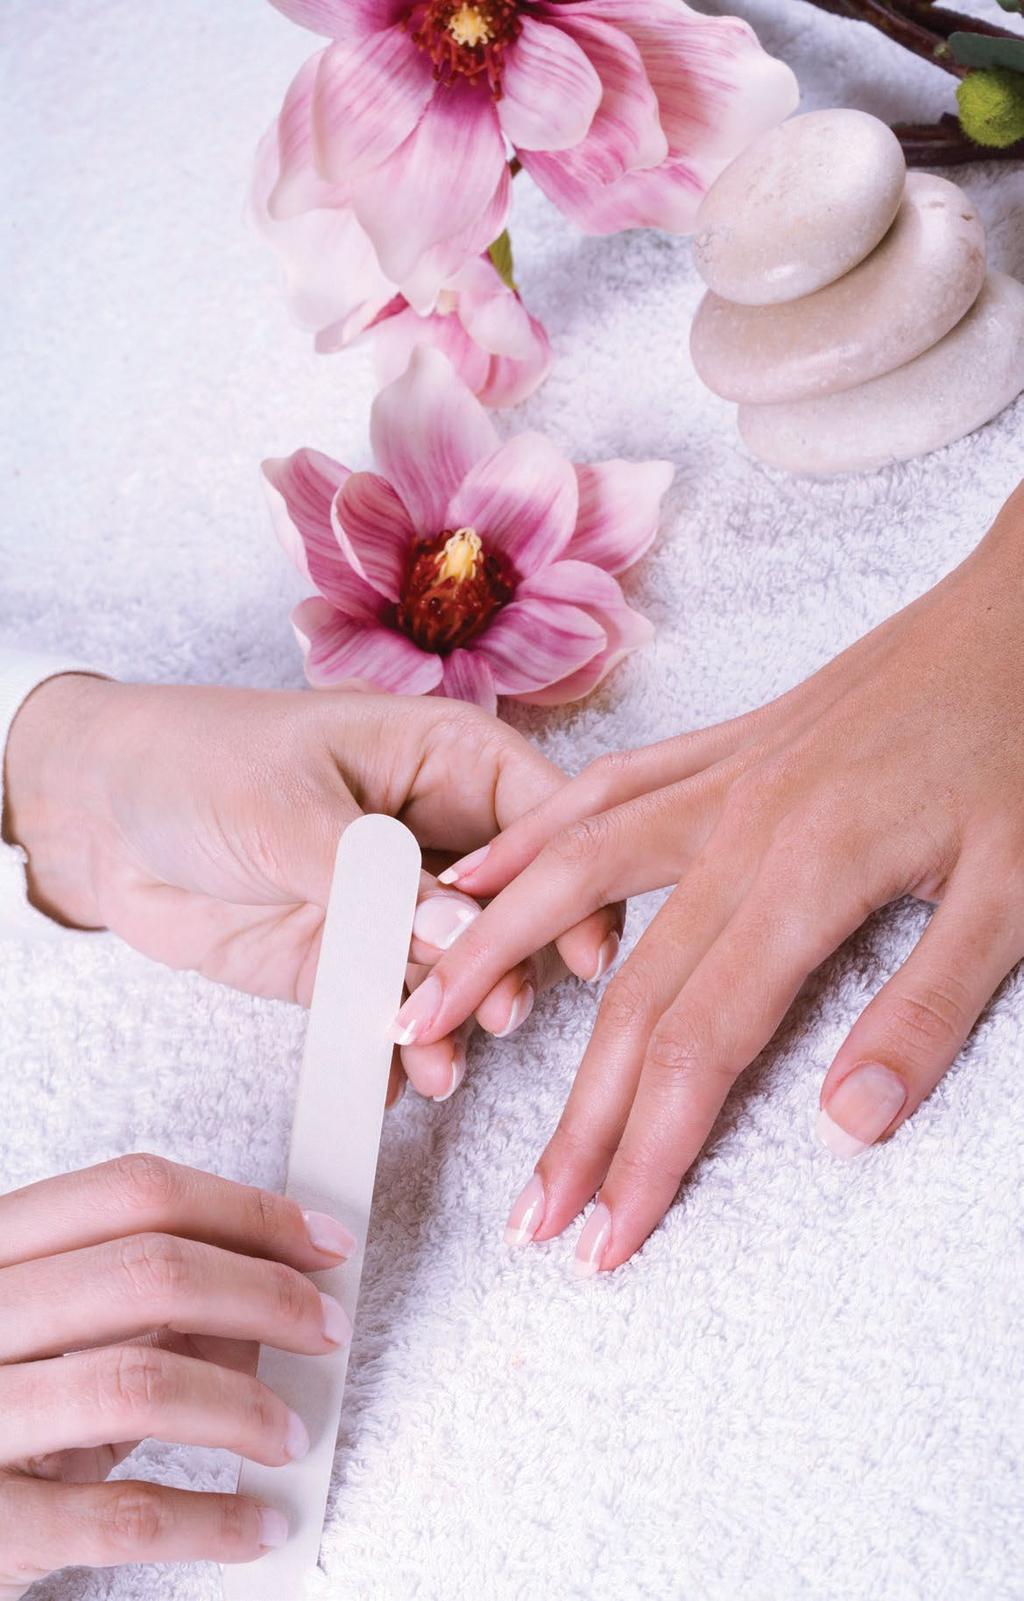 Beauty OF HANDS & FEET PROFESSIONAL GELeration A soak off gel polish which can outlast the most demanding lifestyles.